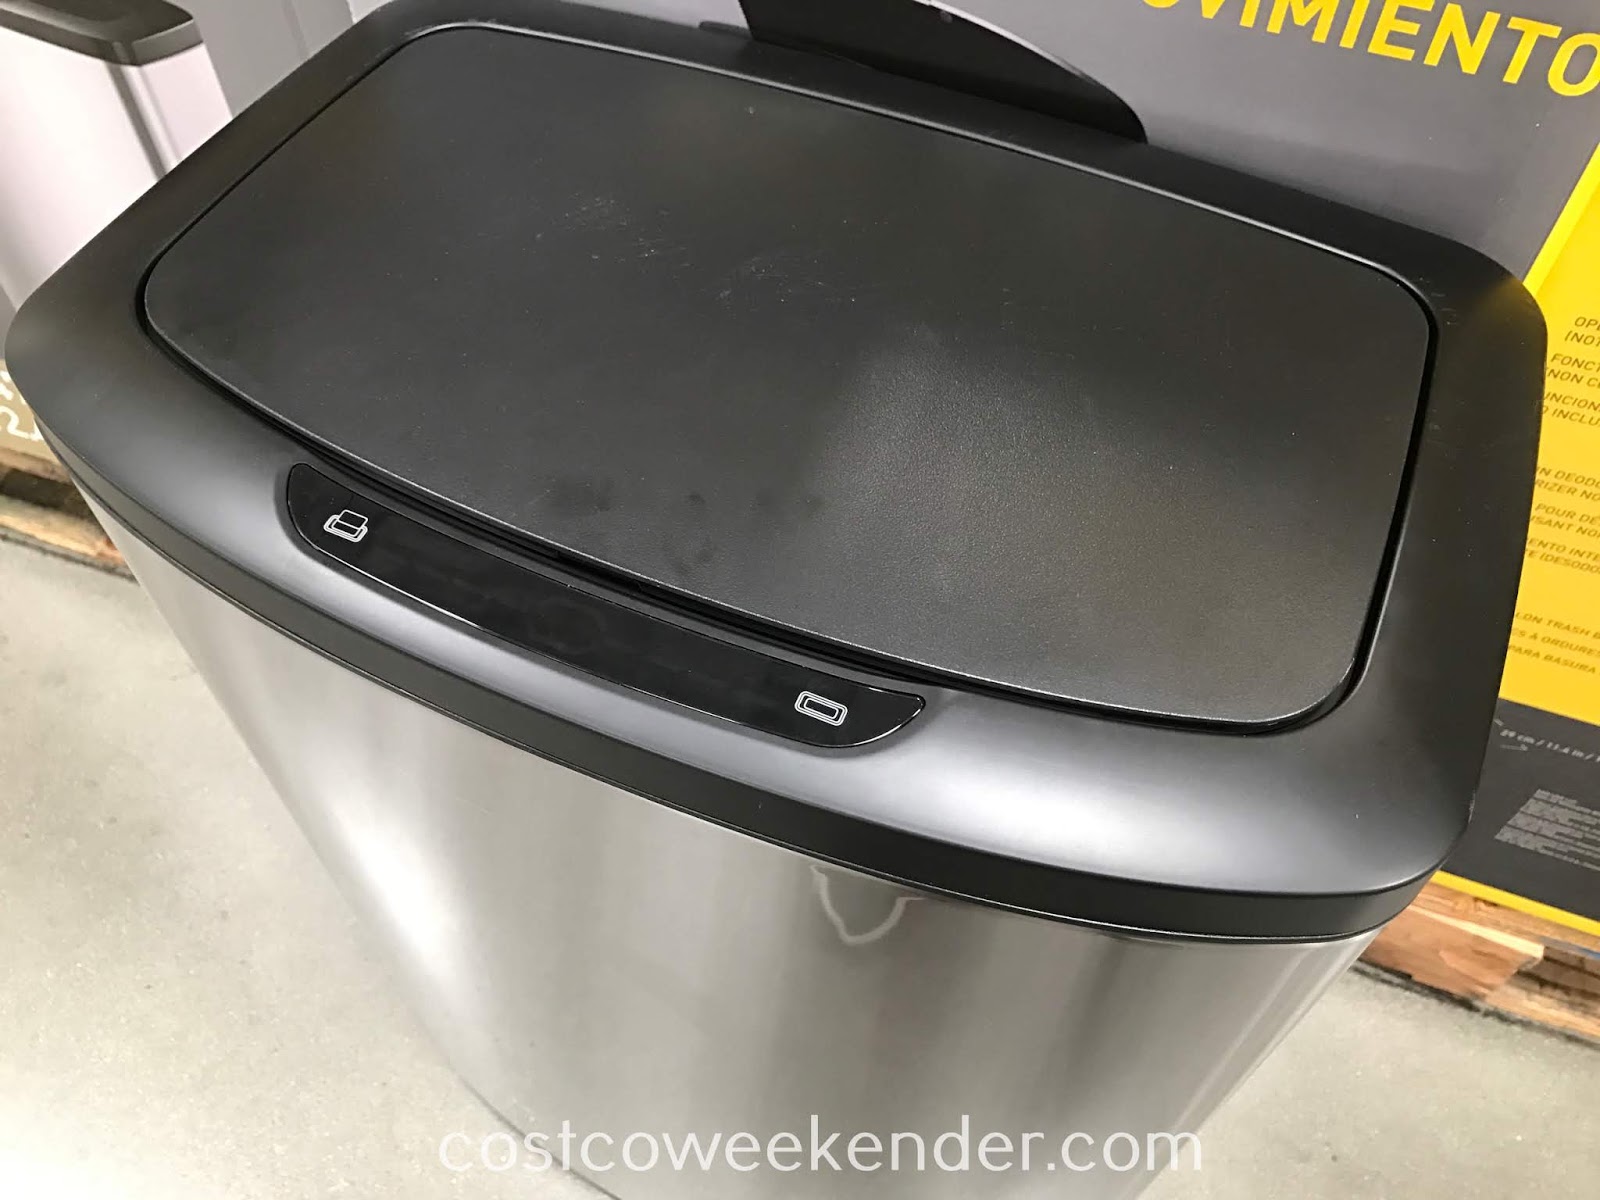 Awesome costco trash can touchless Eko Motion Sensor Trash Can Costco Weekender